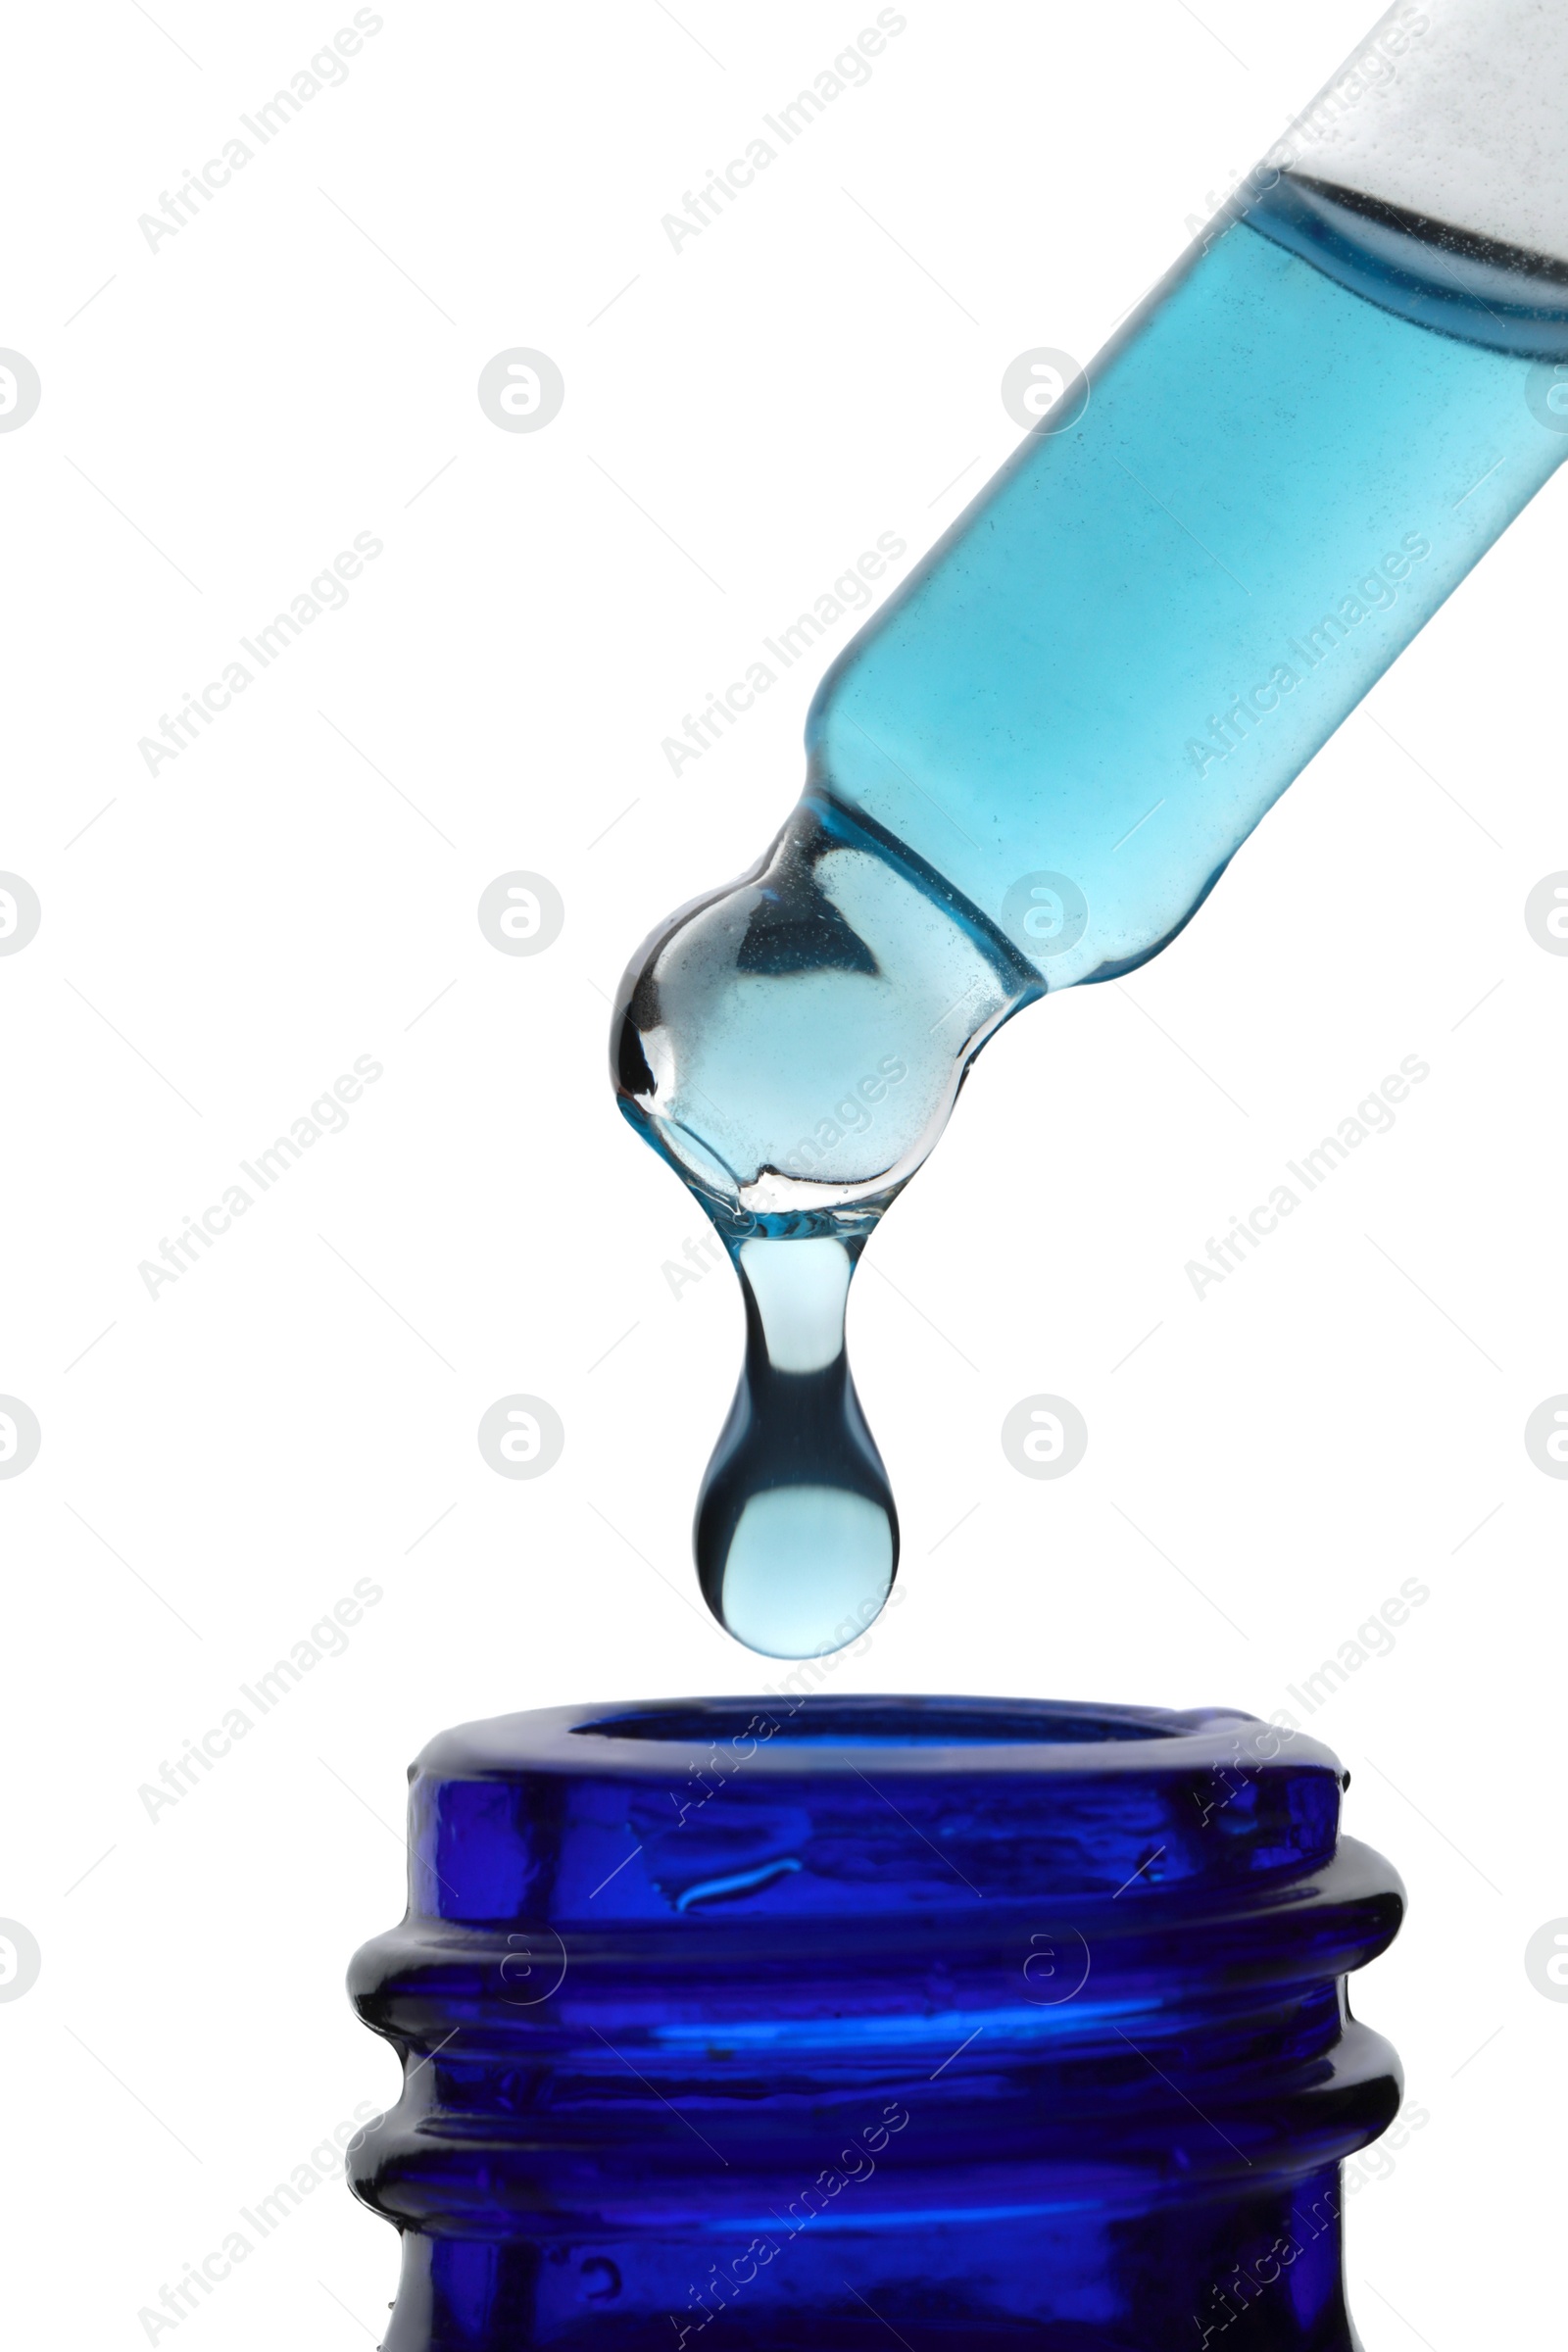 Photo of Dripping light blue facial serum from pipette into glass bottle on white background, closeup